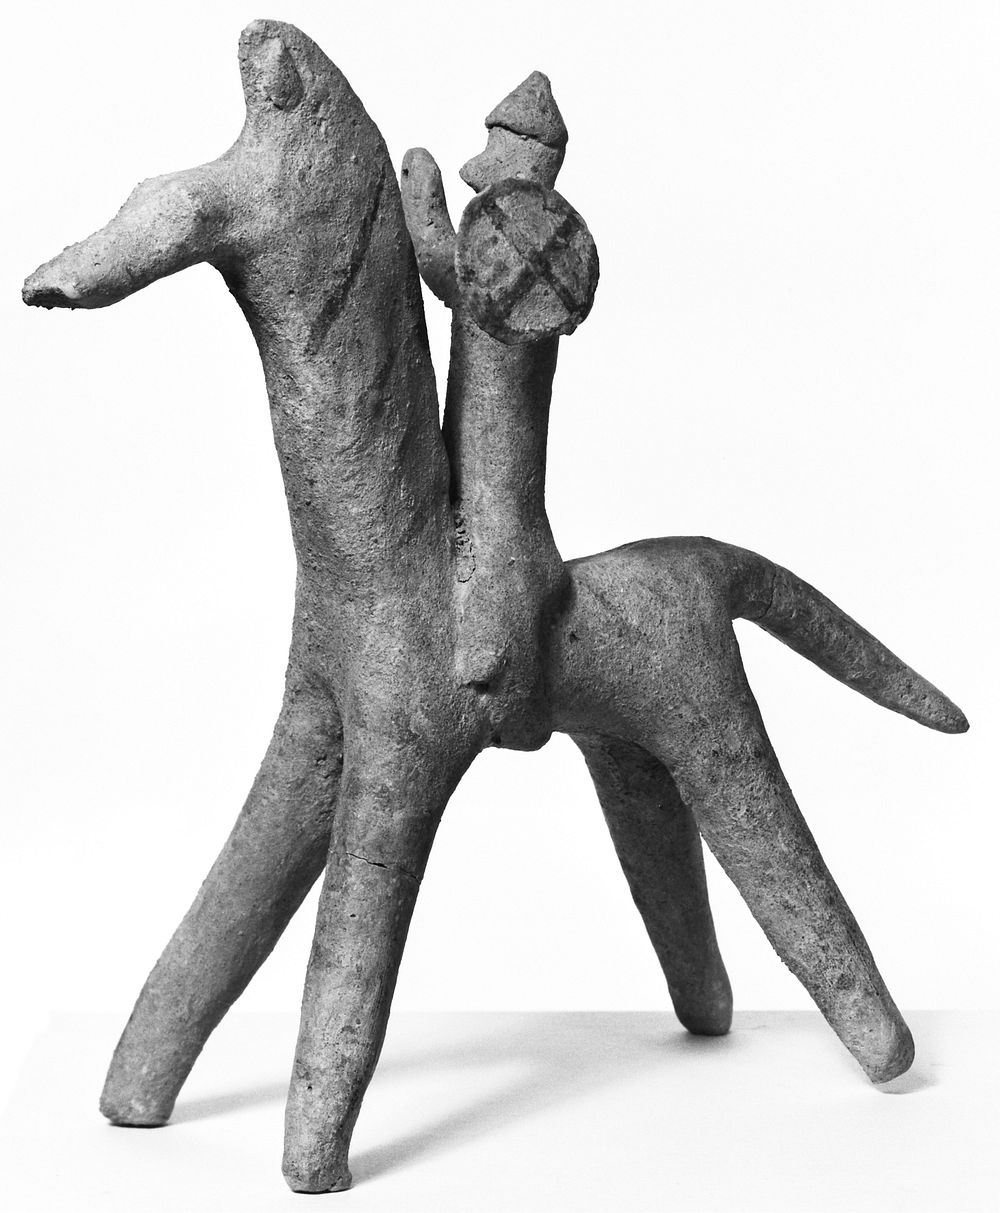 Statuette of a Horse and Rider